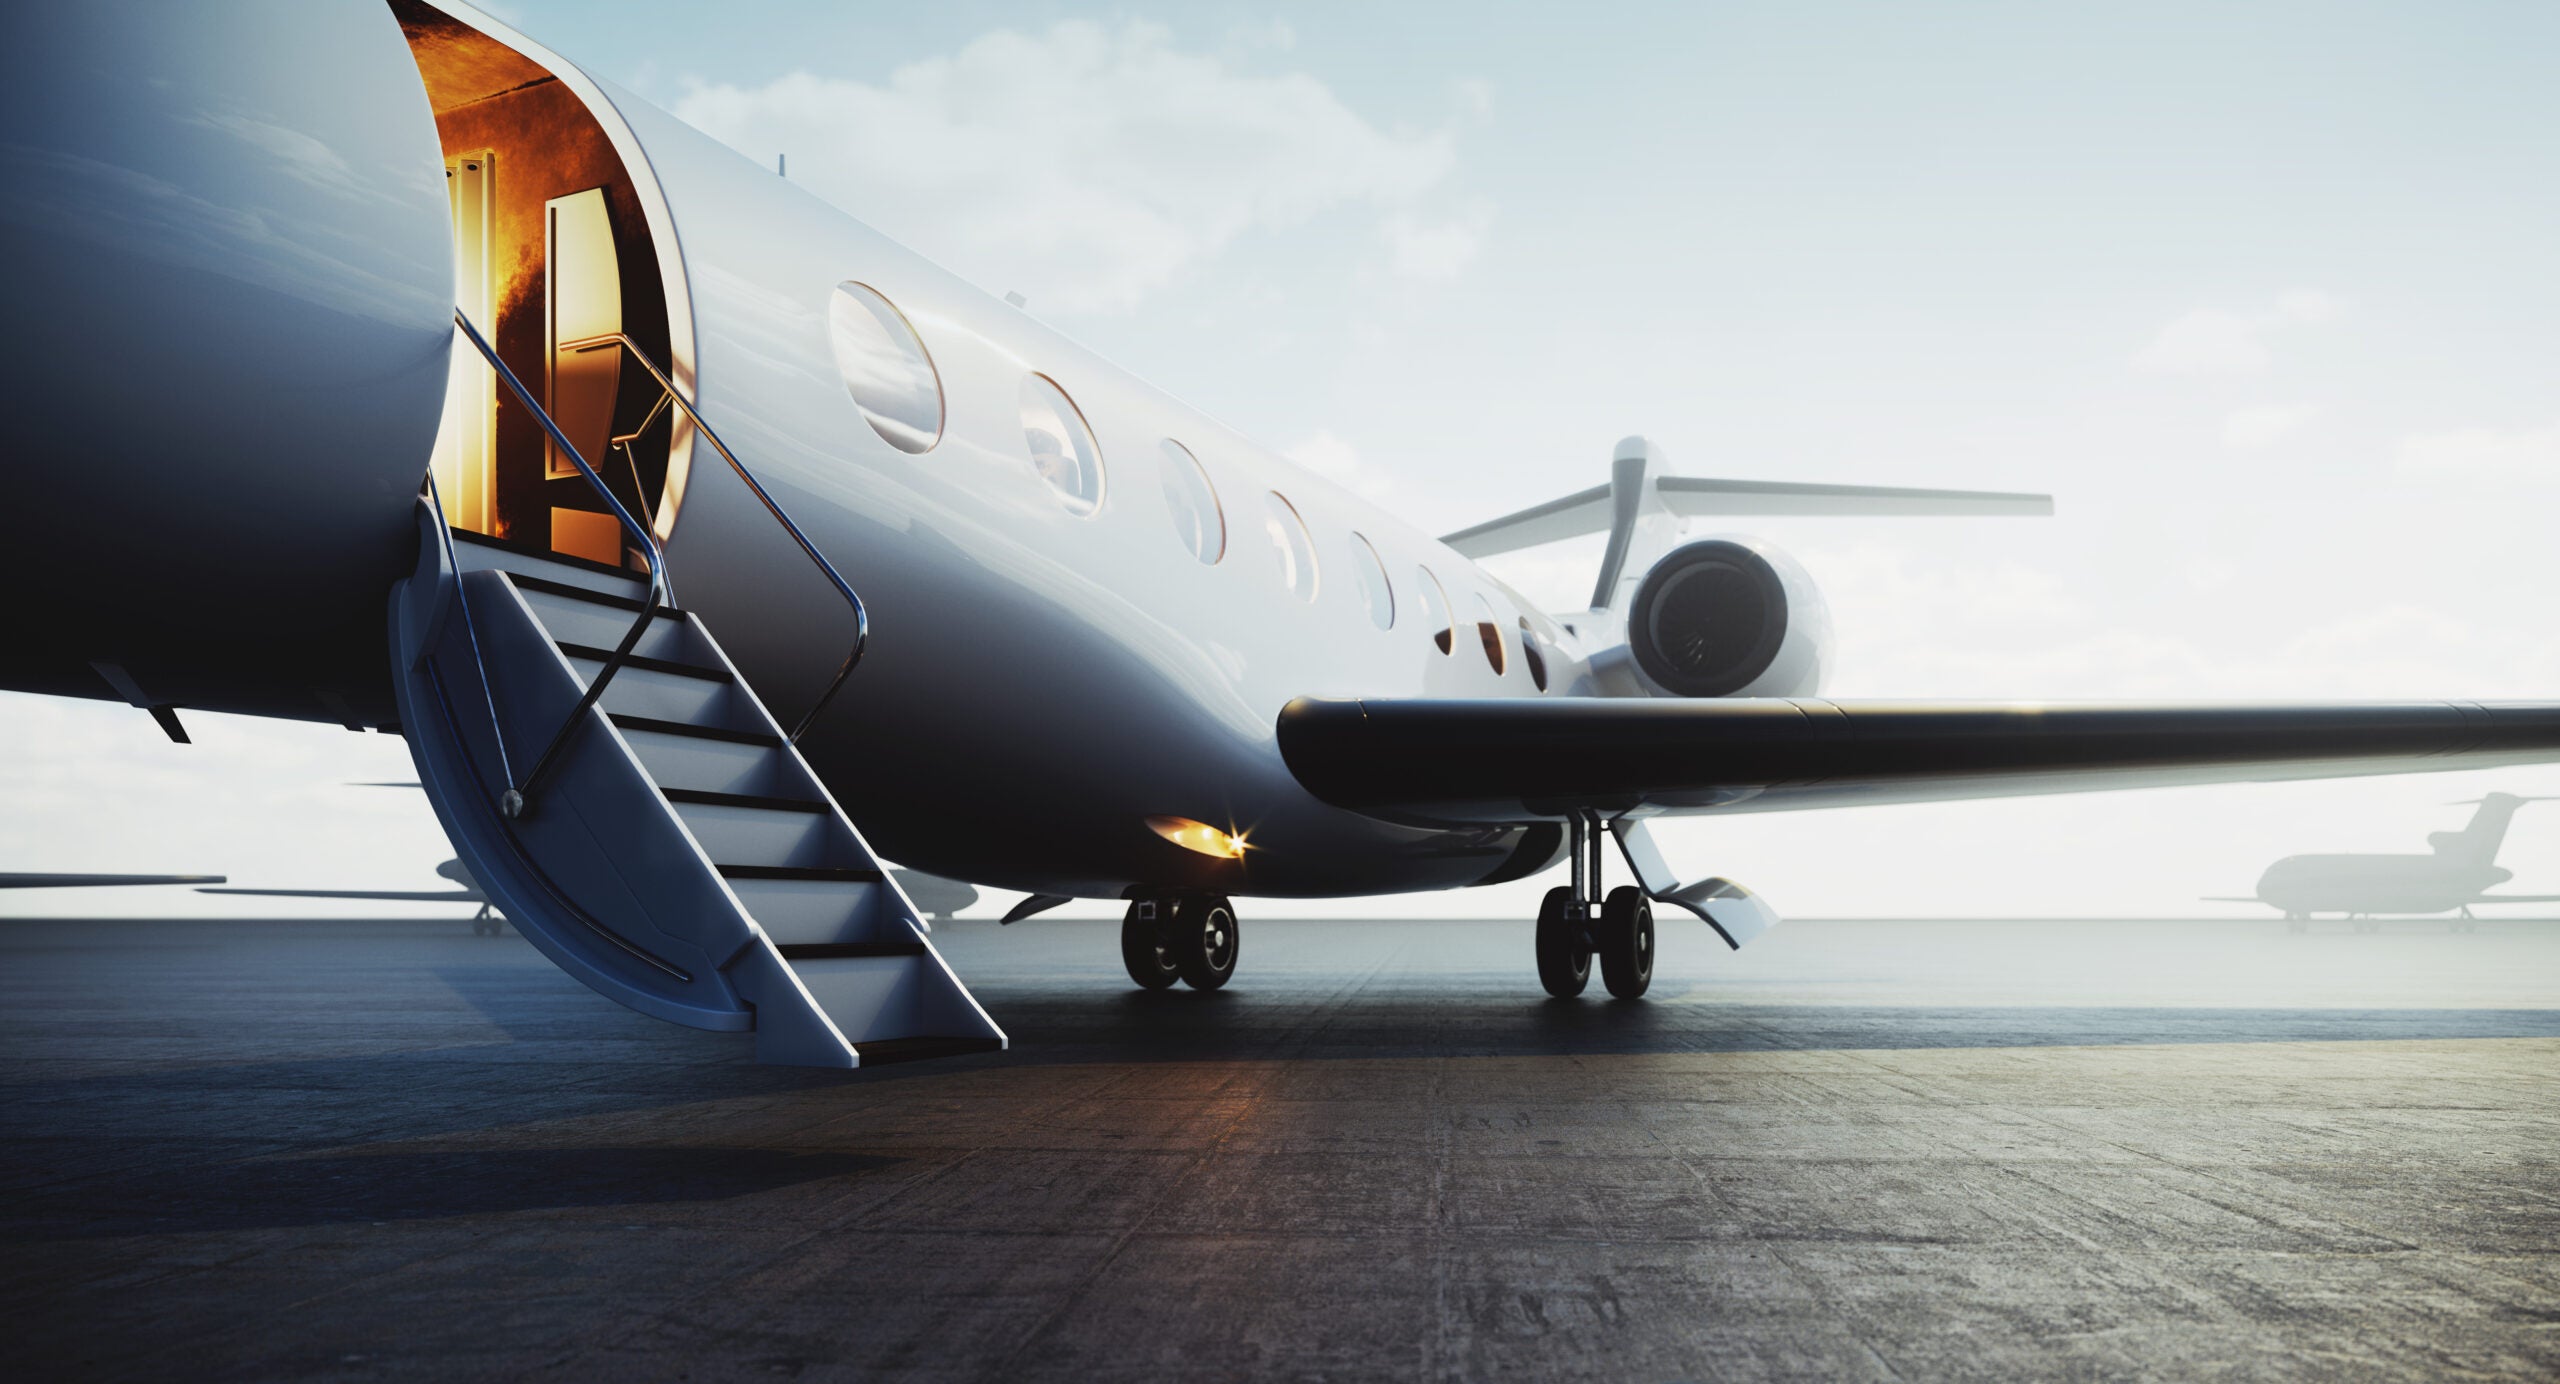 Finding the Right Jet Share Program for You